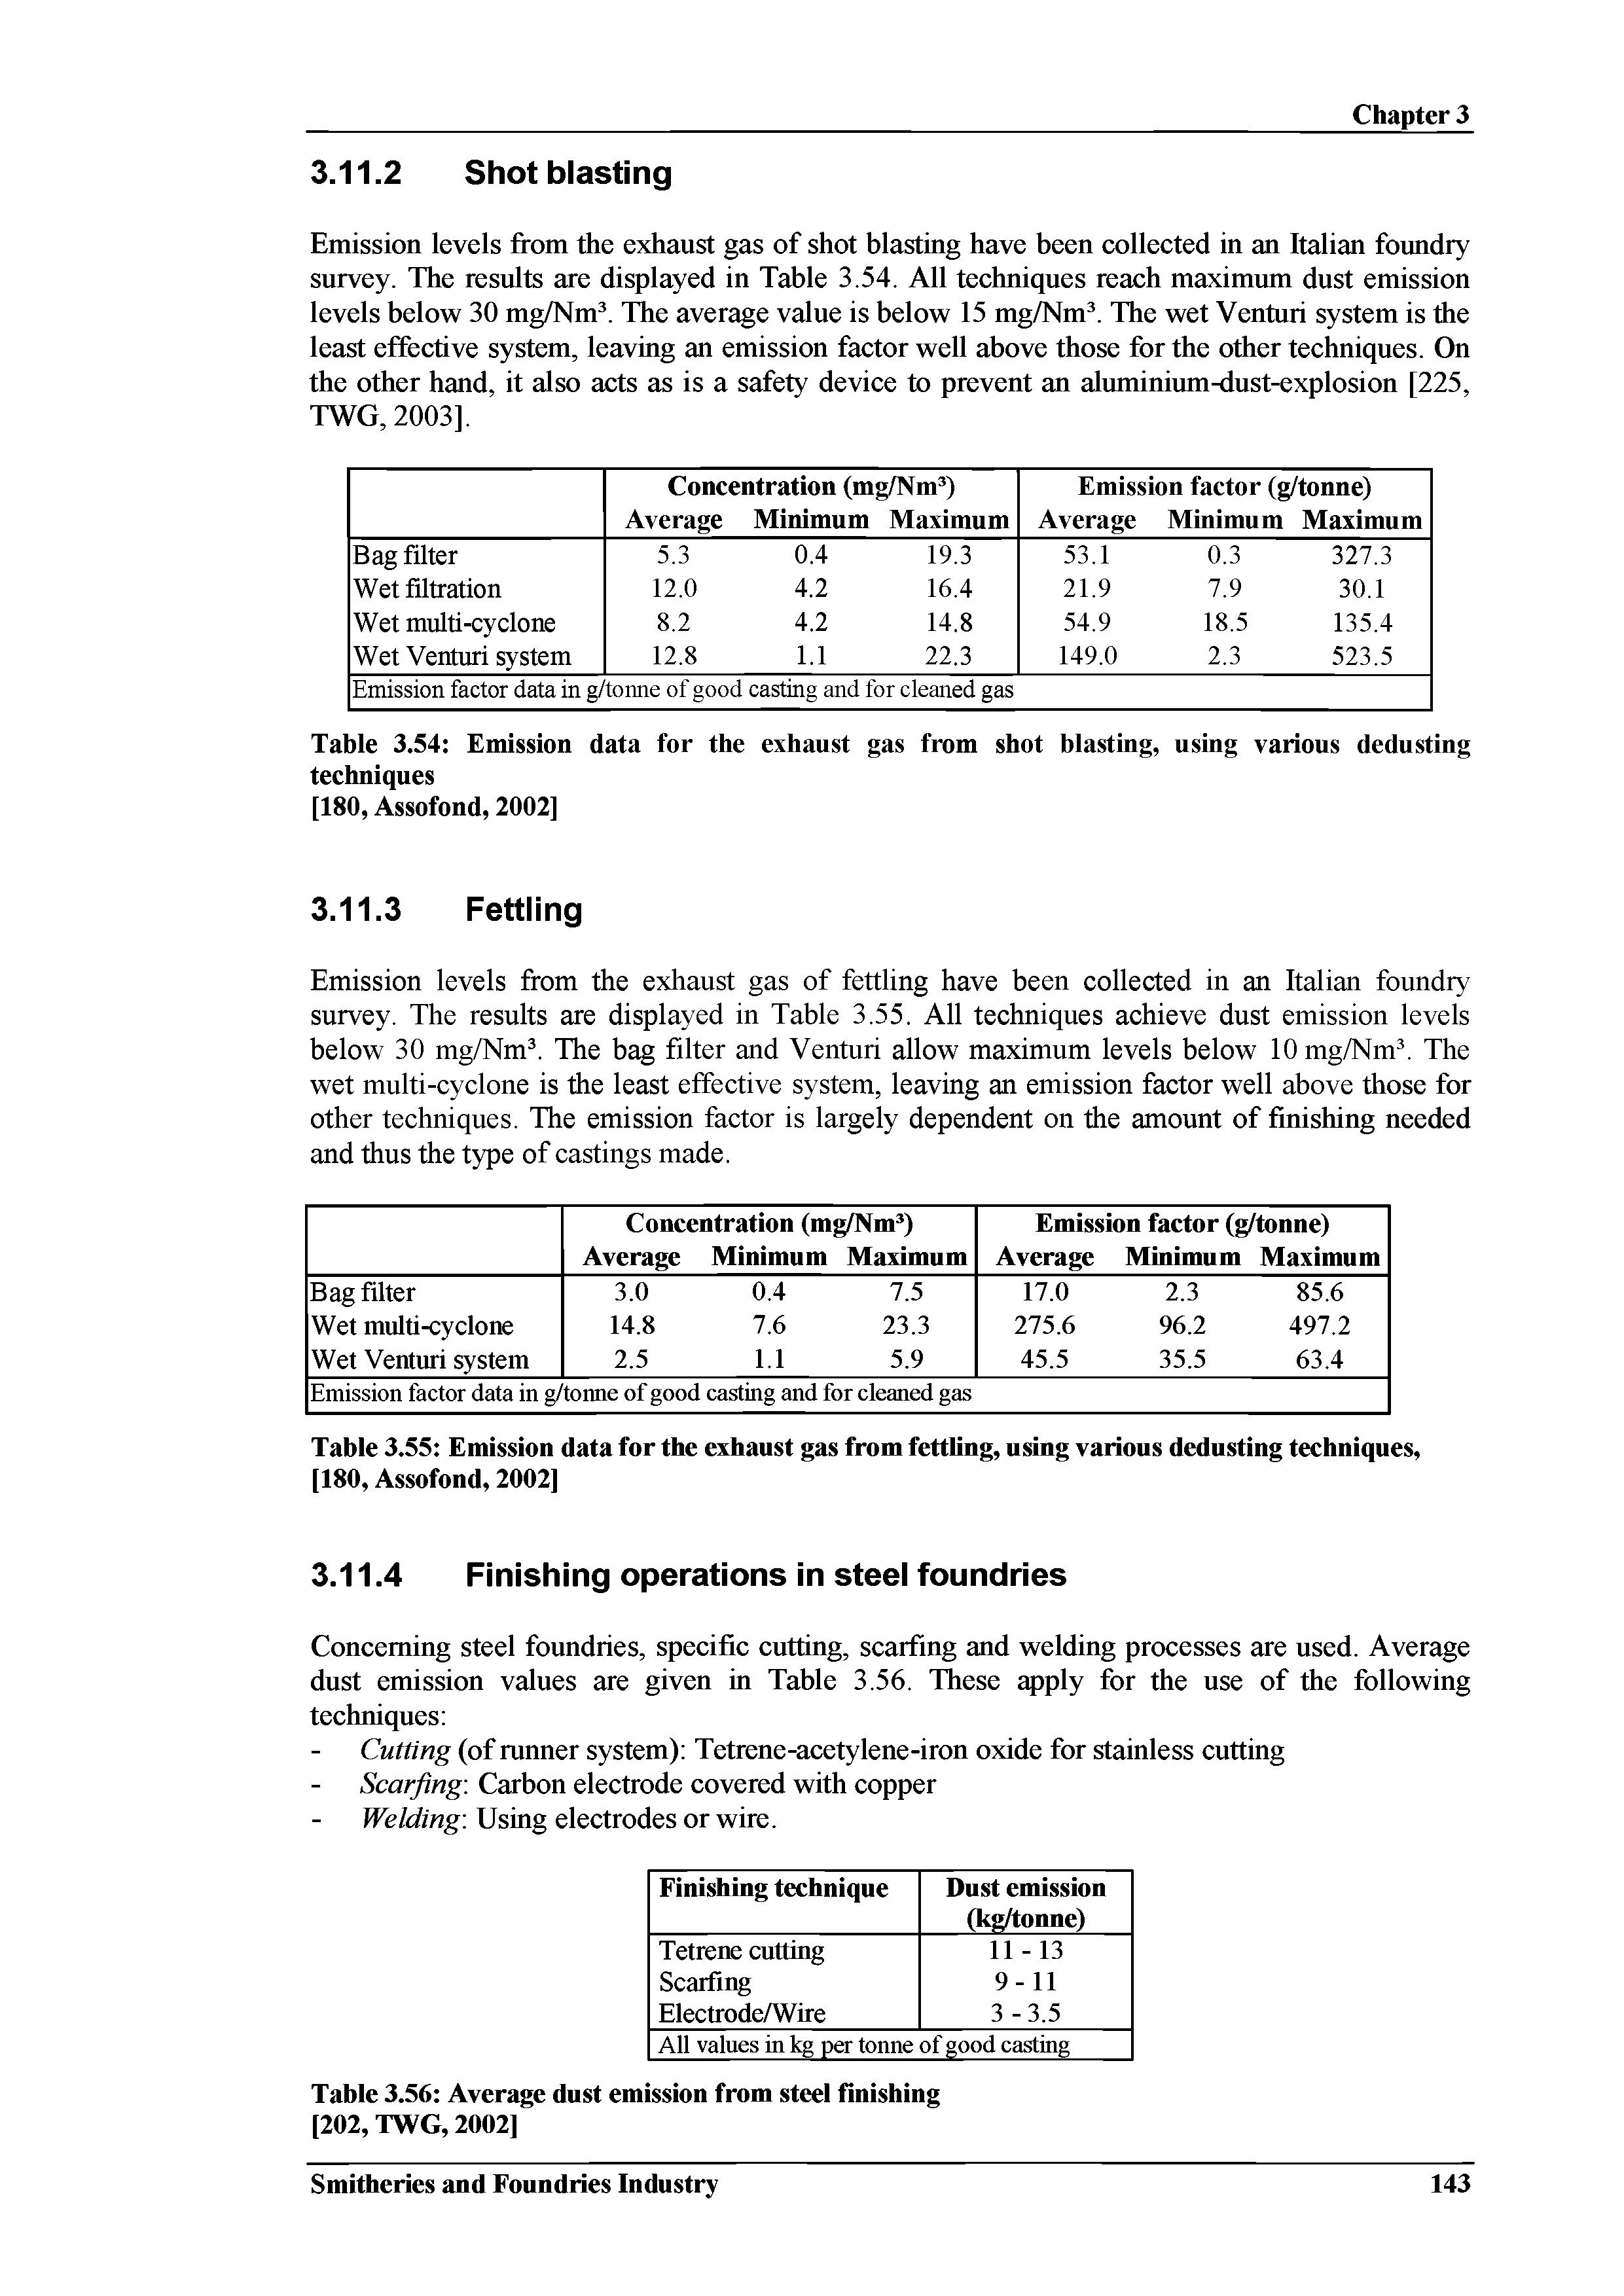 Table 3.55 Emission data for the exhaust gas from fettling, using various dedusting techniques, [180, Assofond, 2002]...